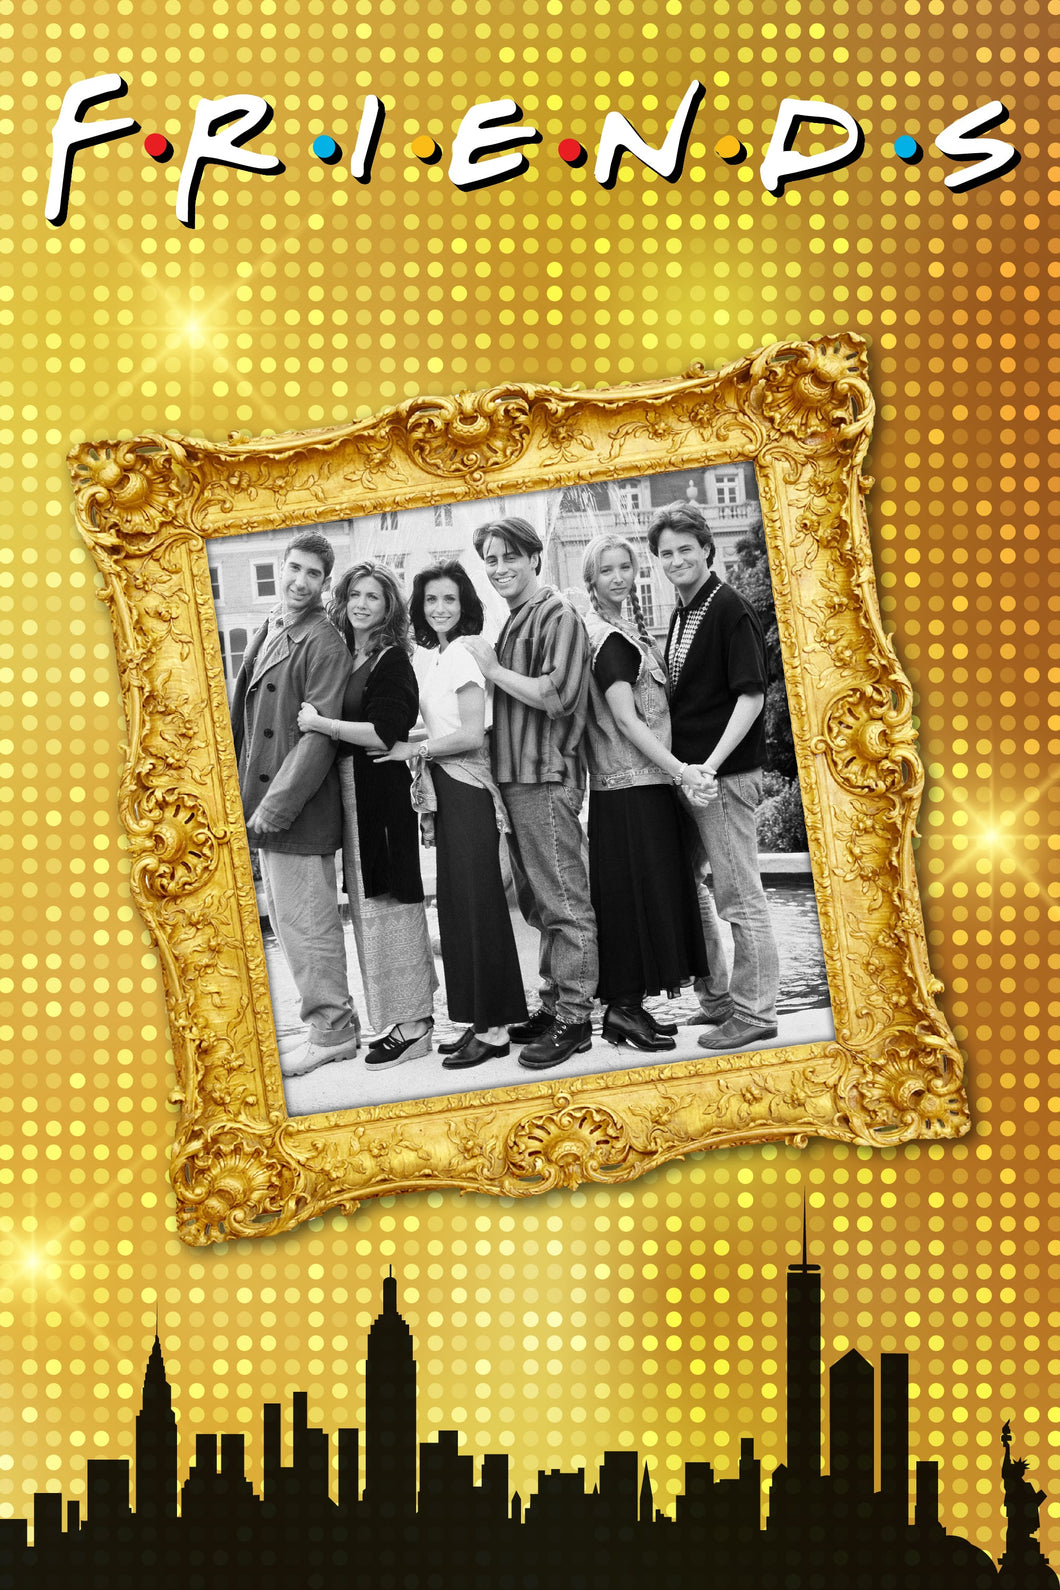 Friends (1994)v4 TV Series High Quality Glossy Paper A1 A2 A3 A4 A3 Framed or Unframed!!!